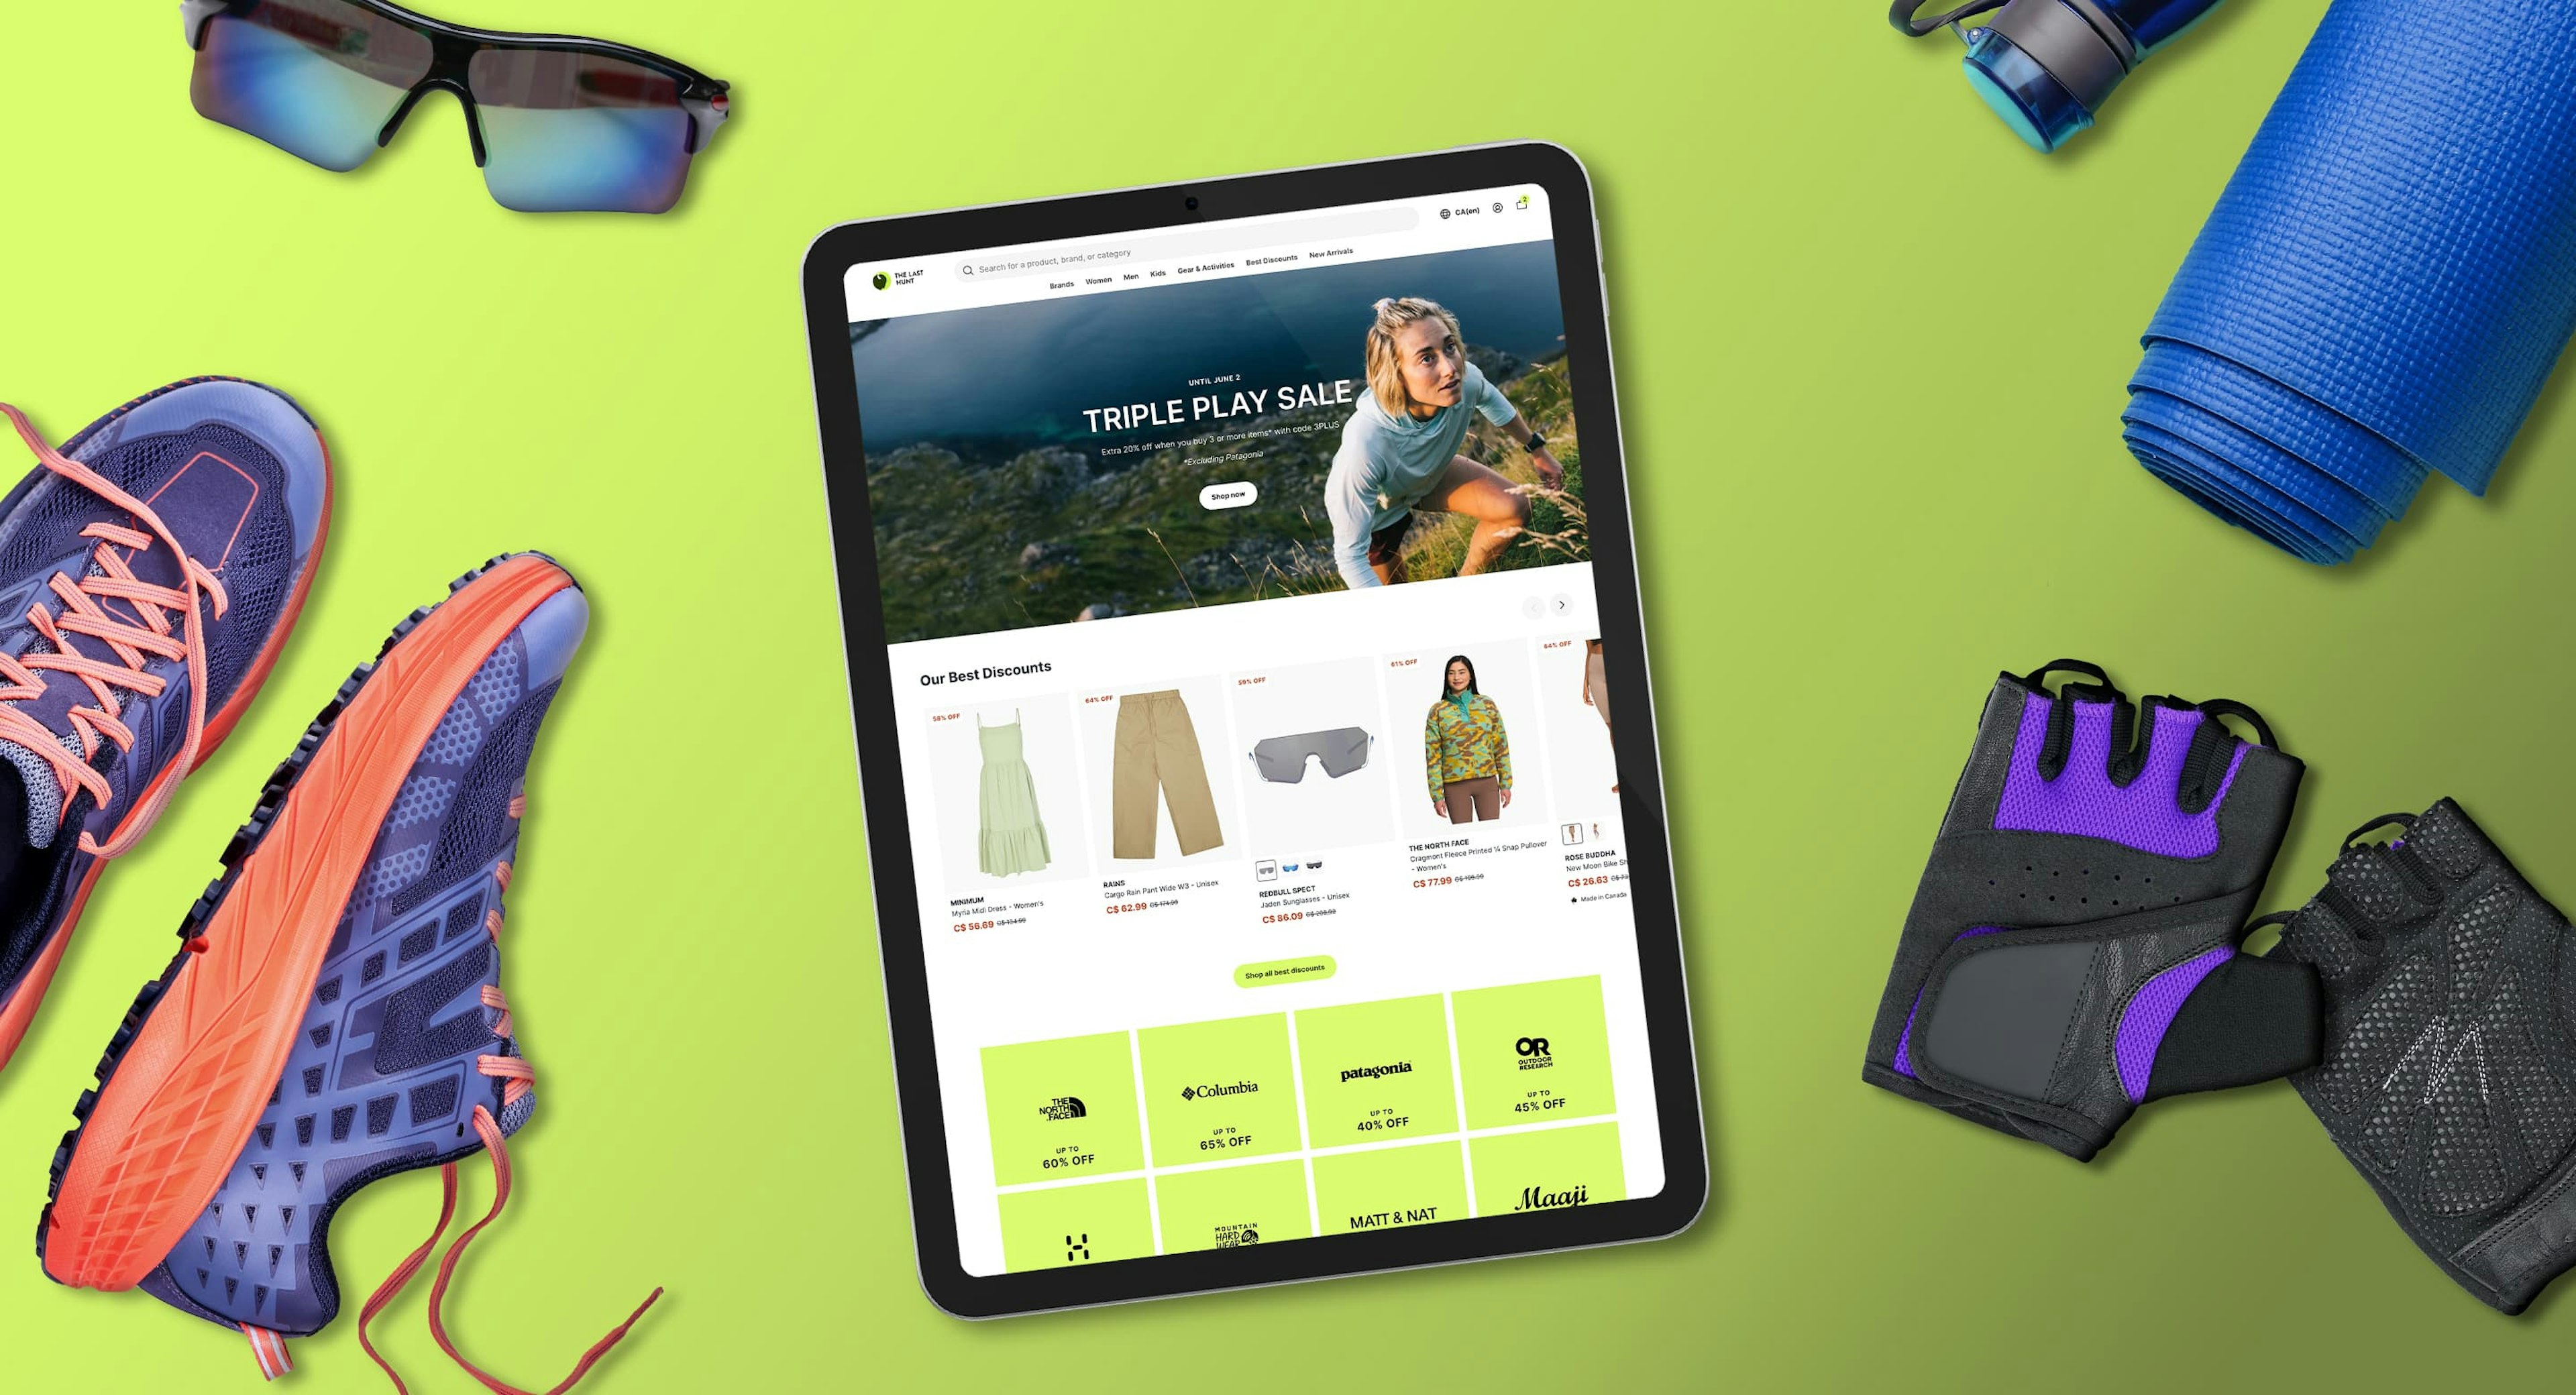 A flatlay of a lime green background with an iPad showing the home page TheLastHunt website, surrounded by running shoes, sports sunglasses, a yoga mat, and hiking gloves.